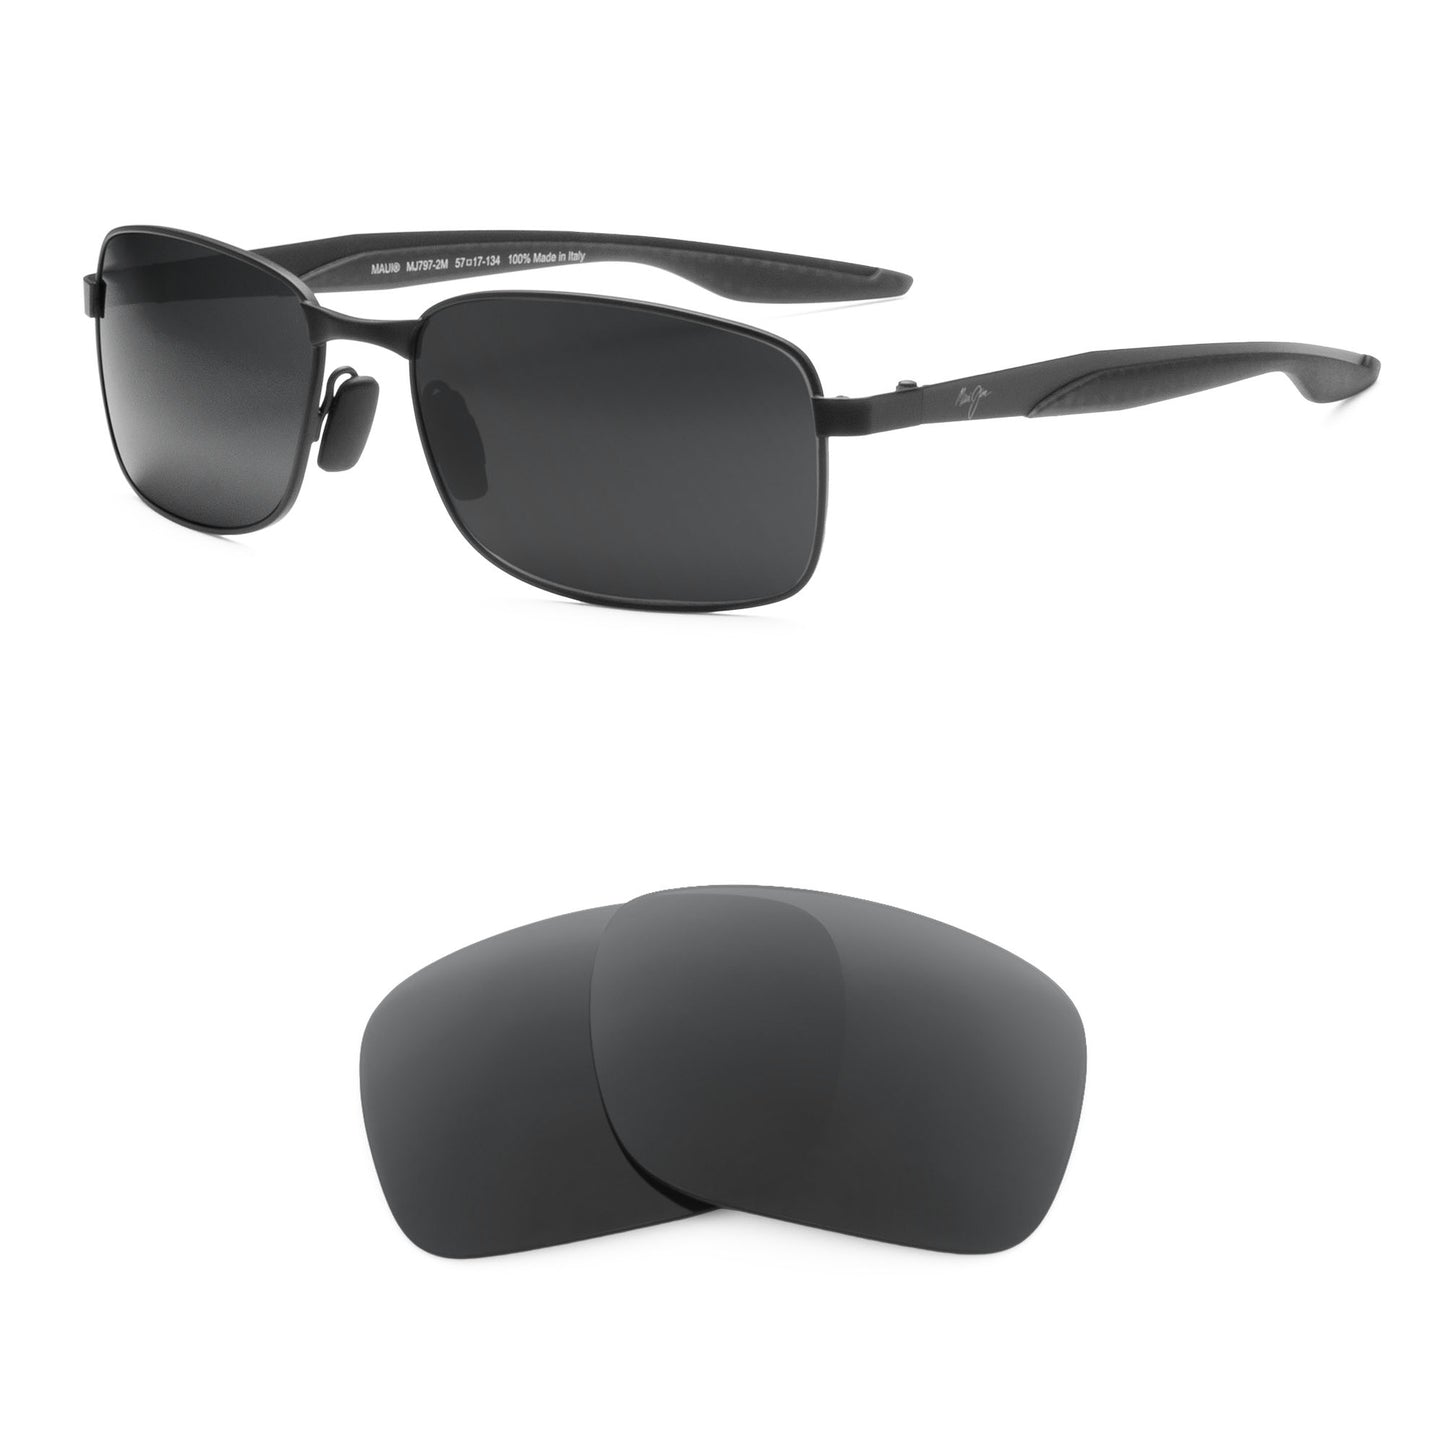 Maui Jim Shoal sunglasses with replacement lenses